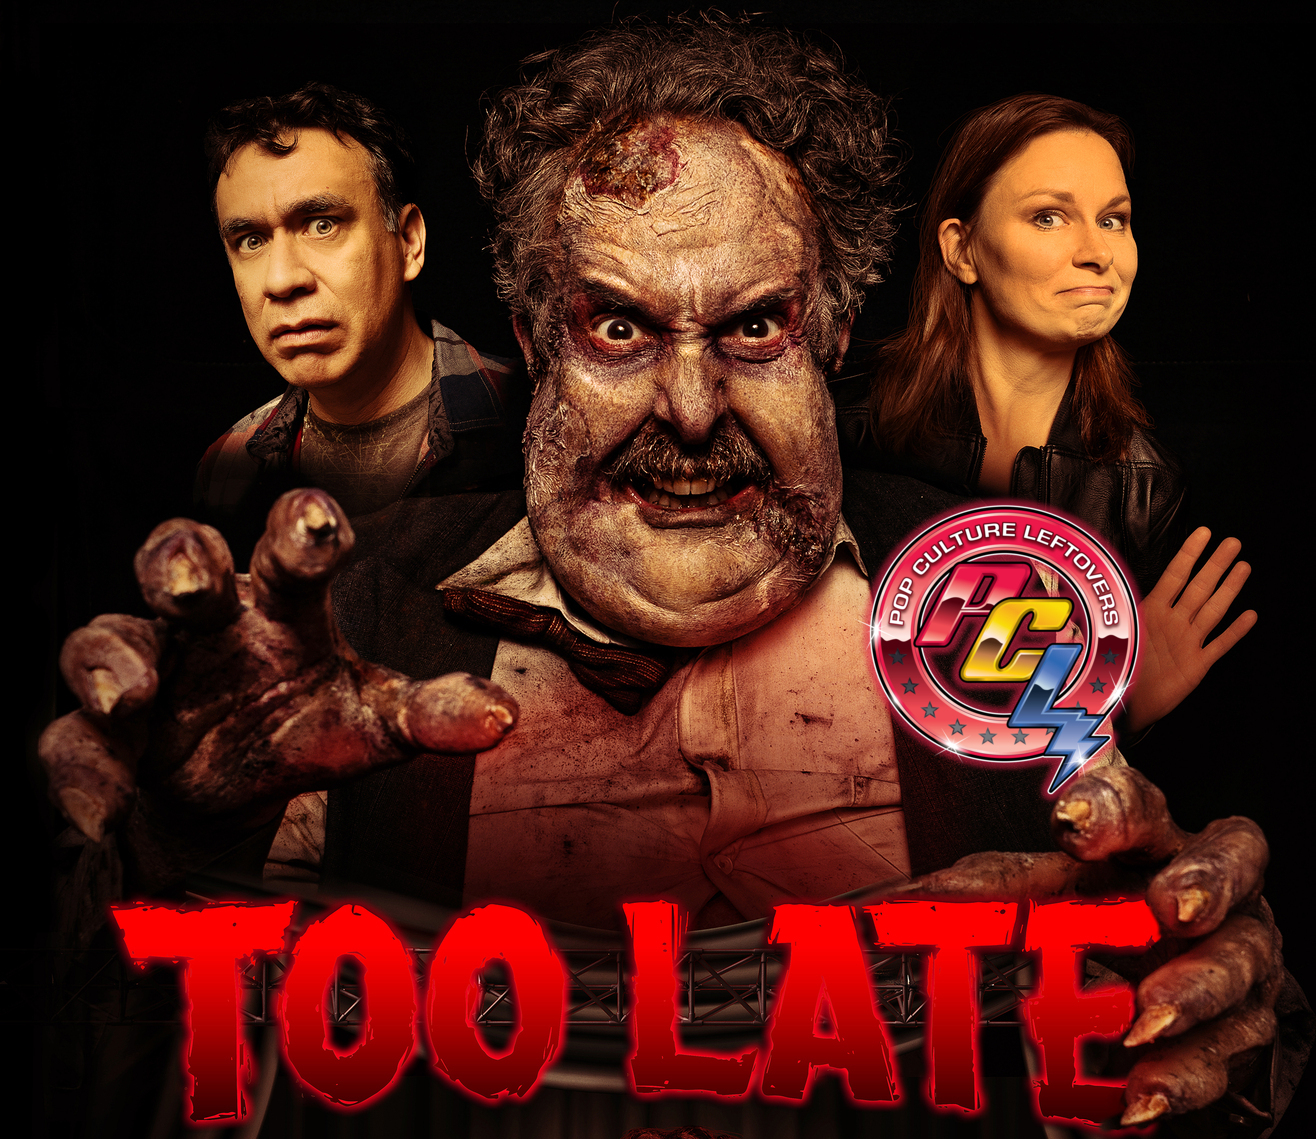 “Too Late” Movie Review by Brooke Daugherty